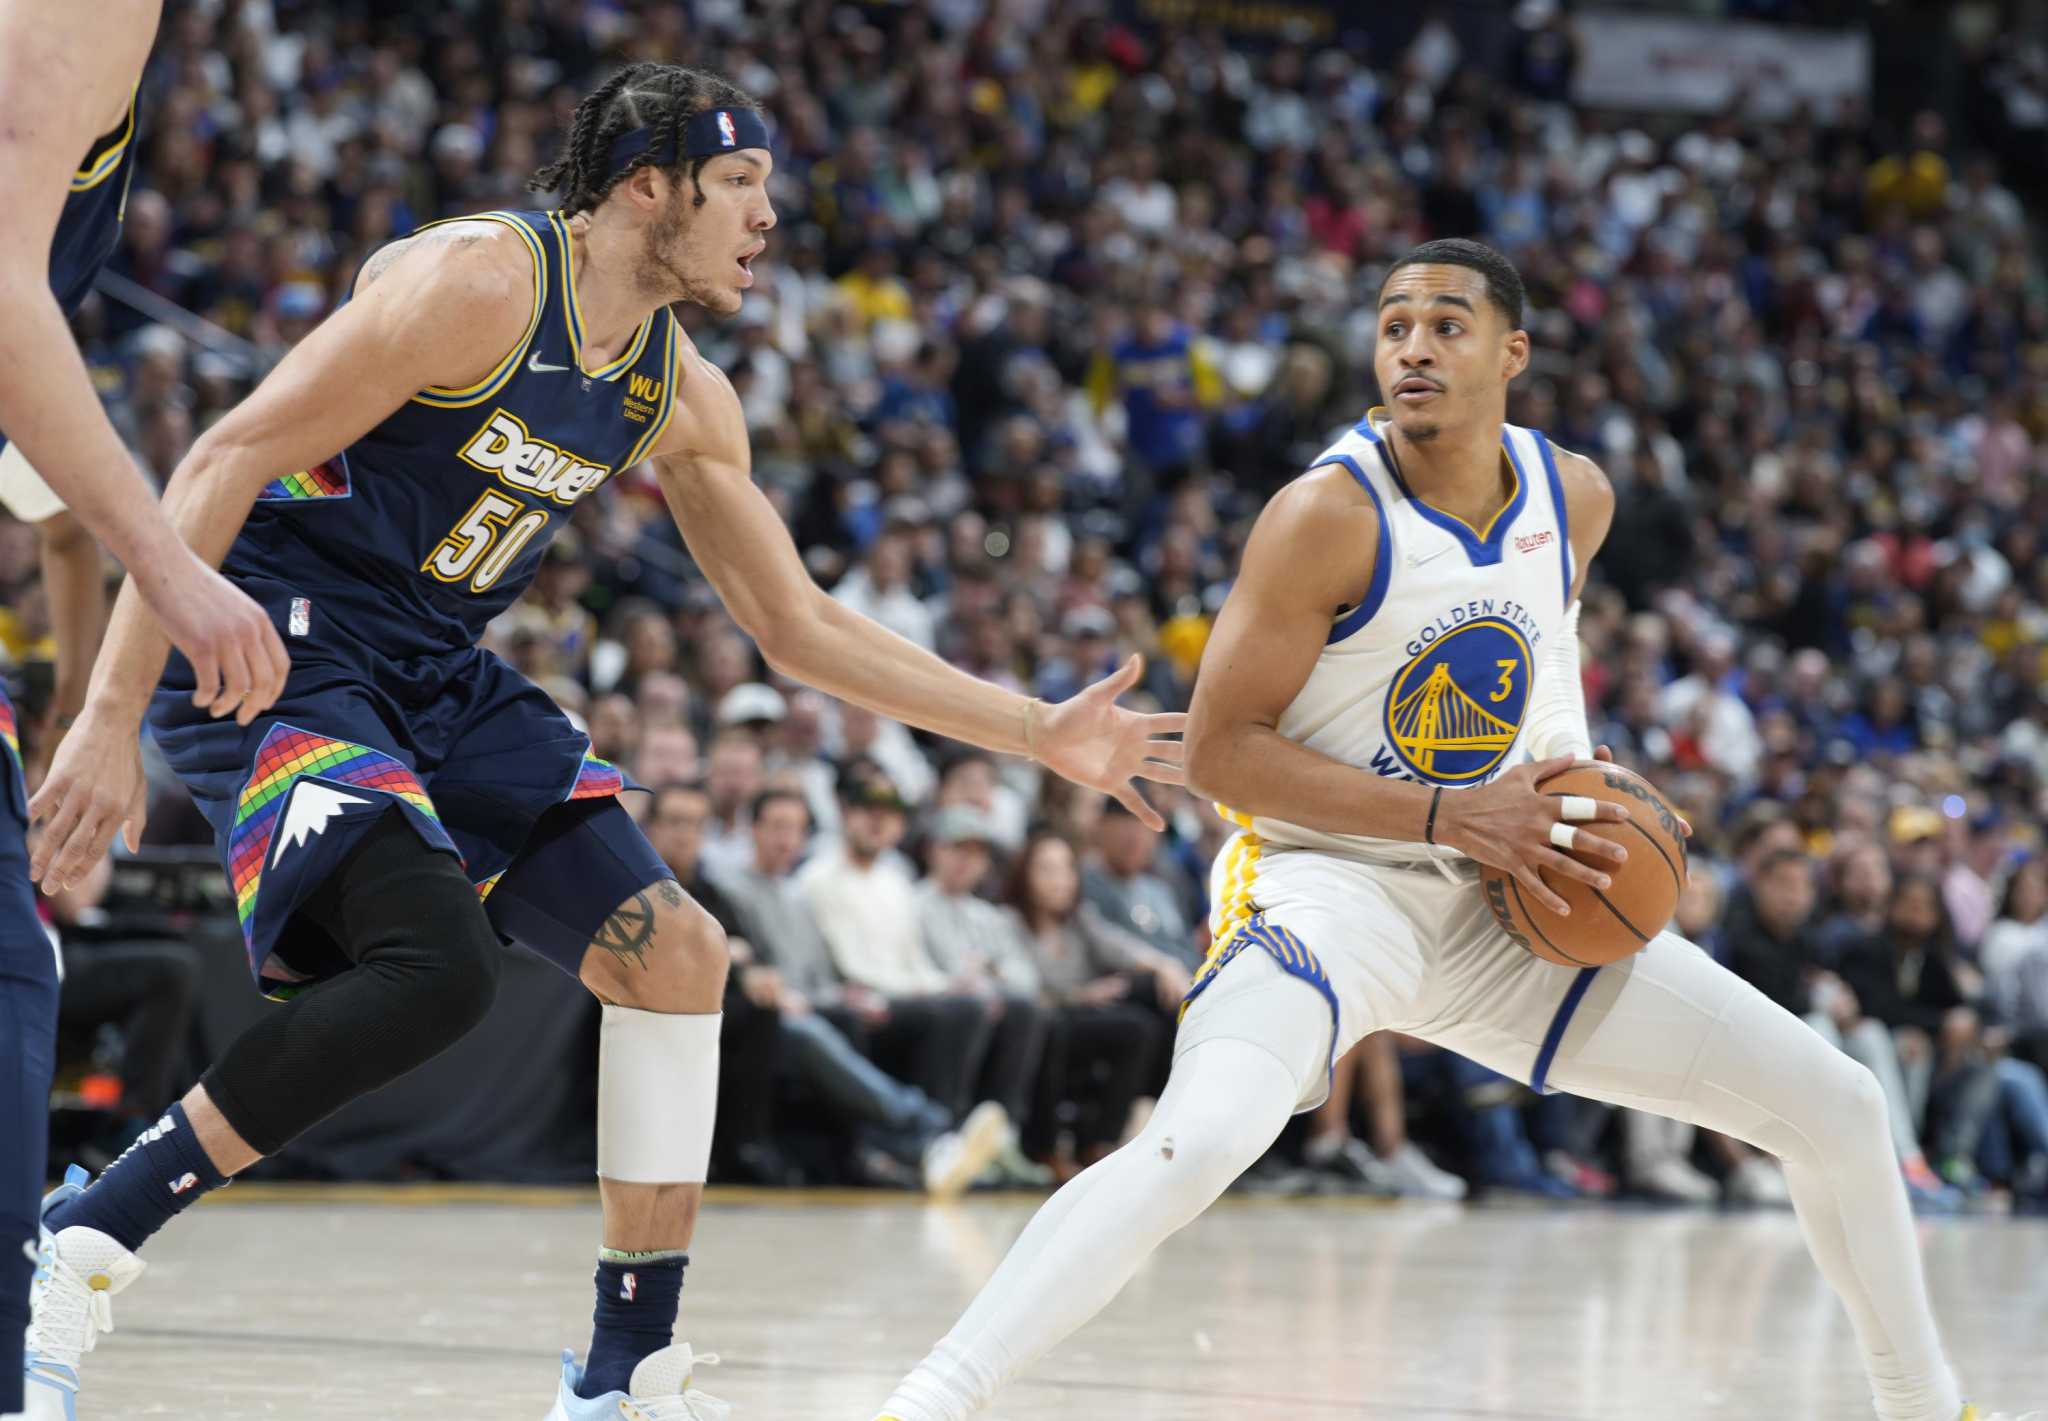 Poole shines in playoff debut to lead Warriors over Nuggets